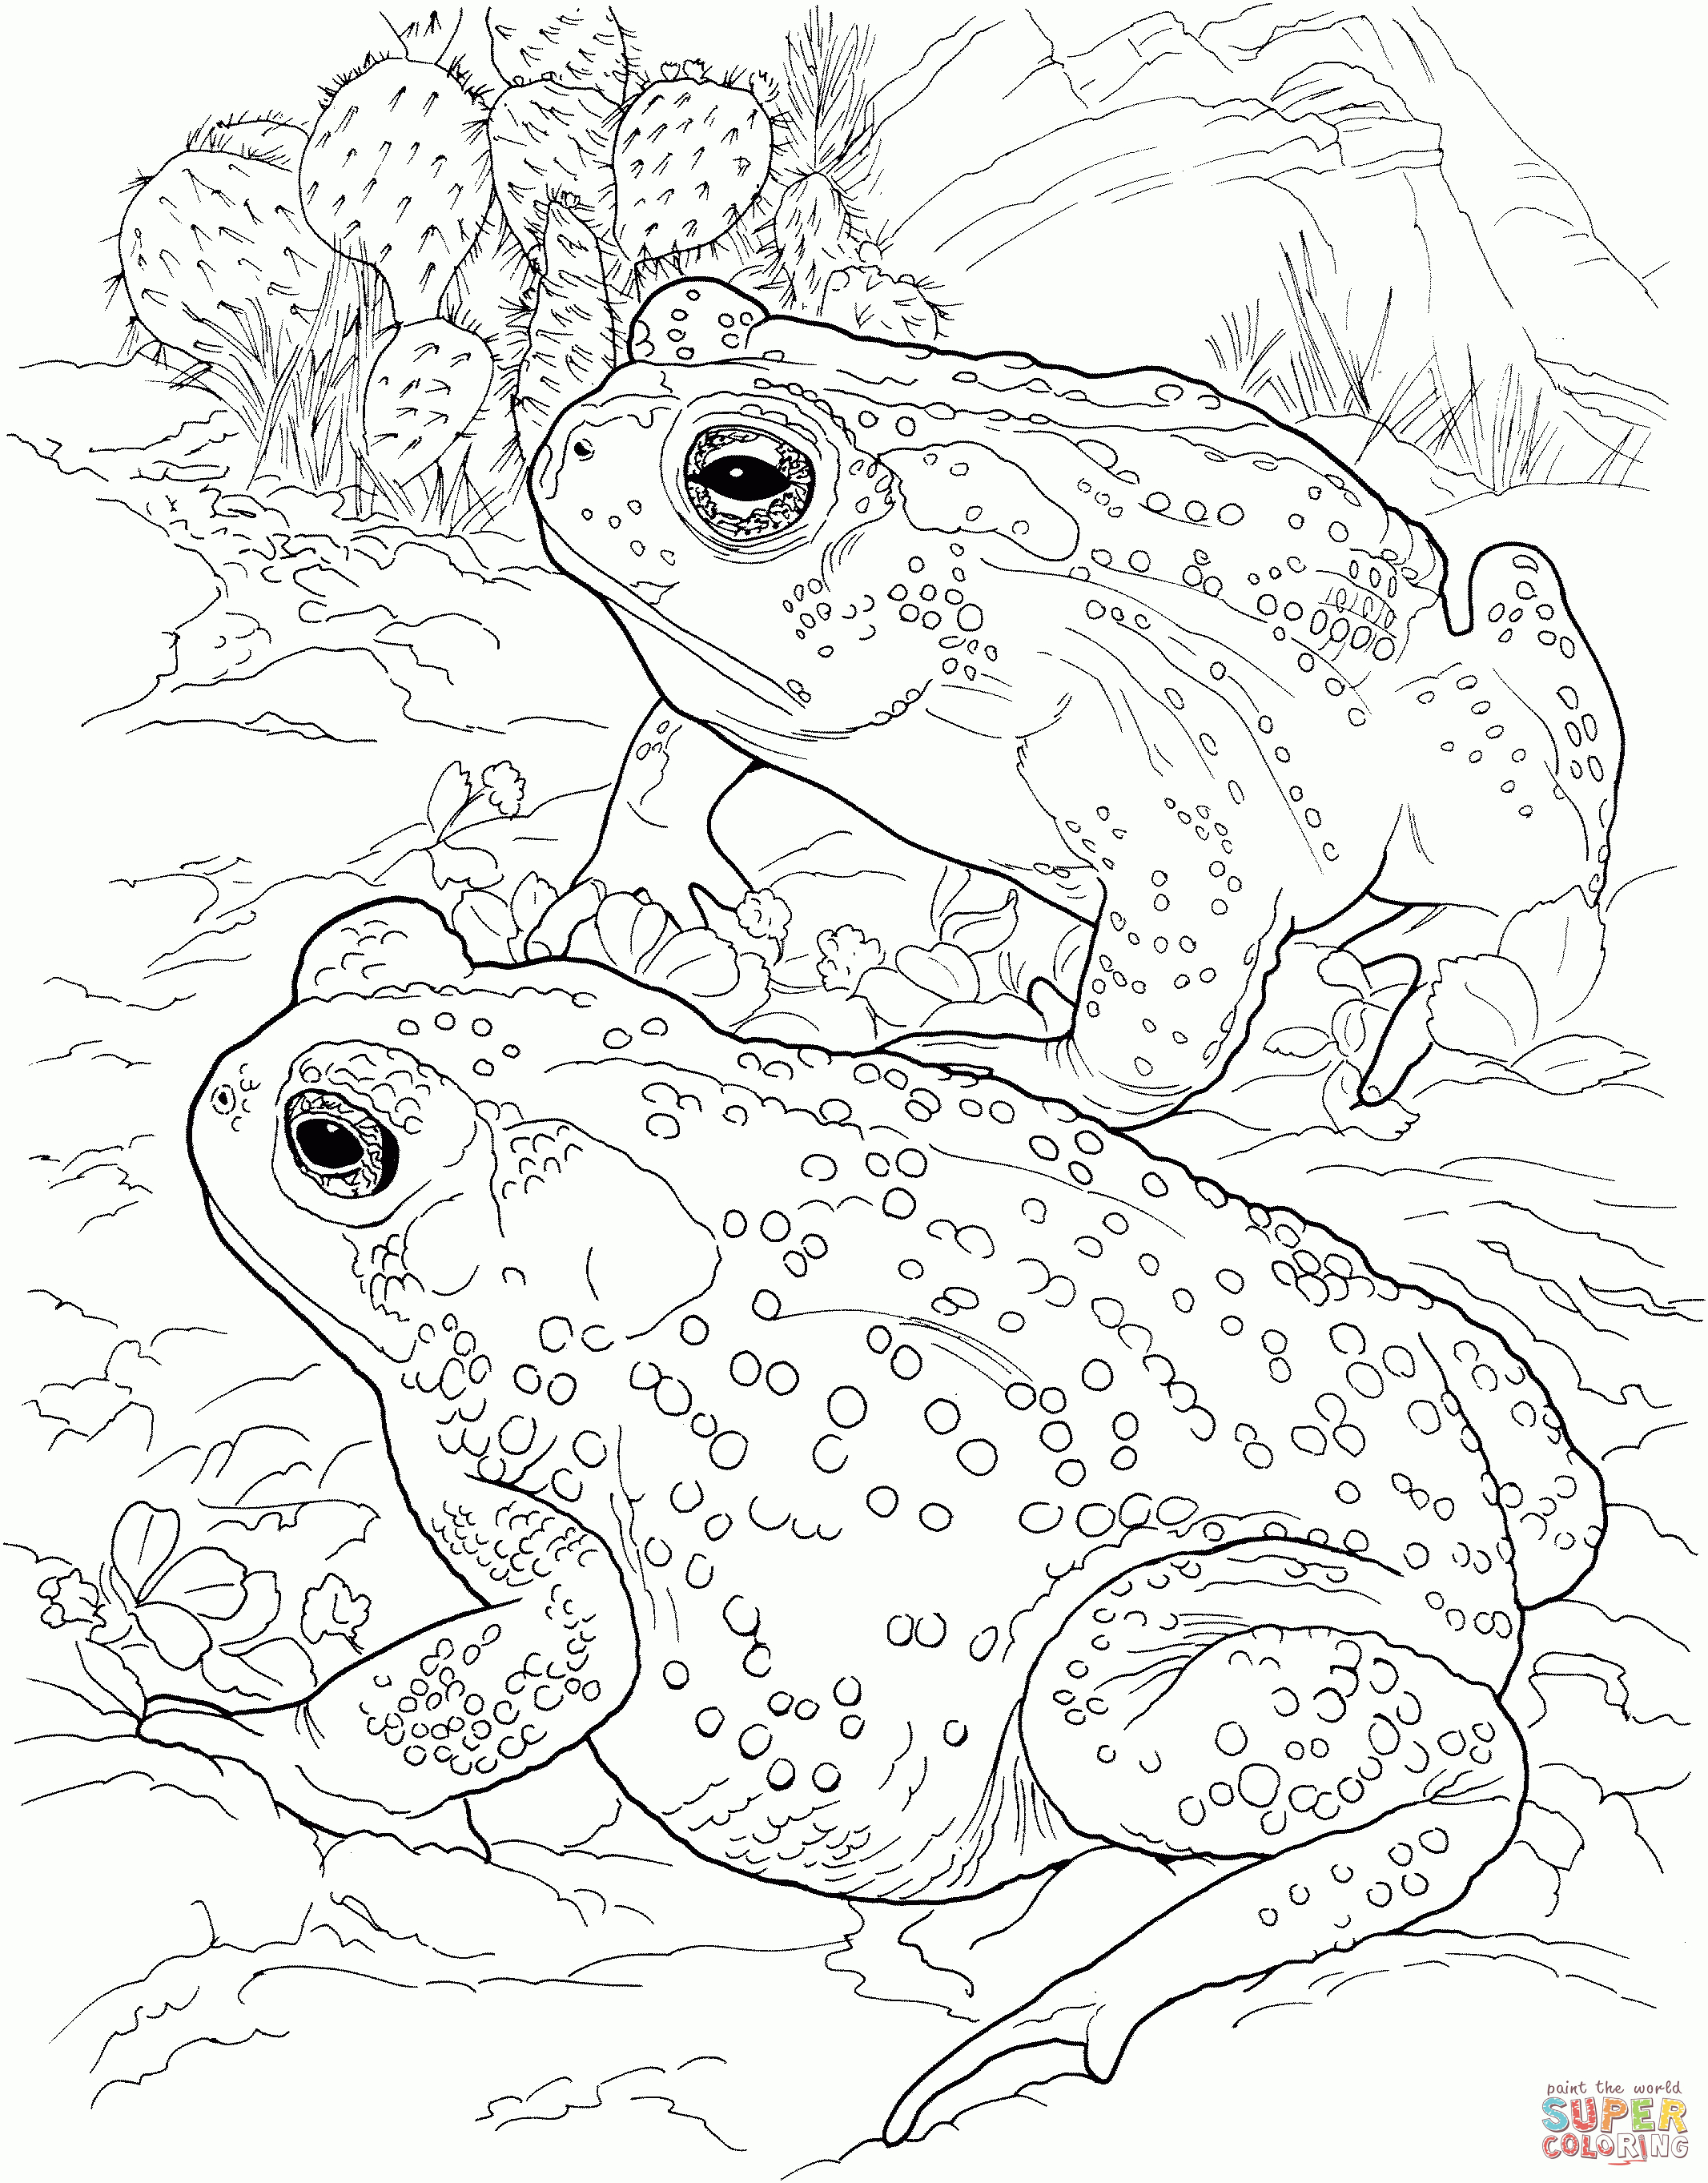 Sonoran Desert Toad Coloring Page | Free Printable Coloring Pages - Free Printable Desert Animals